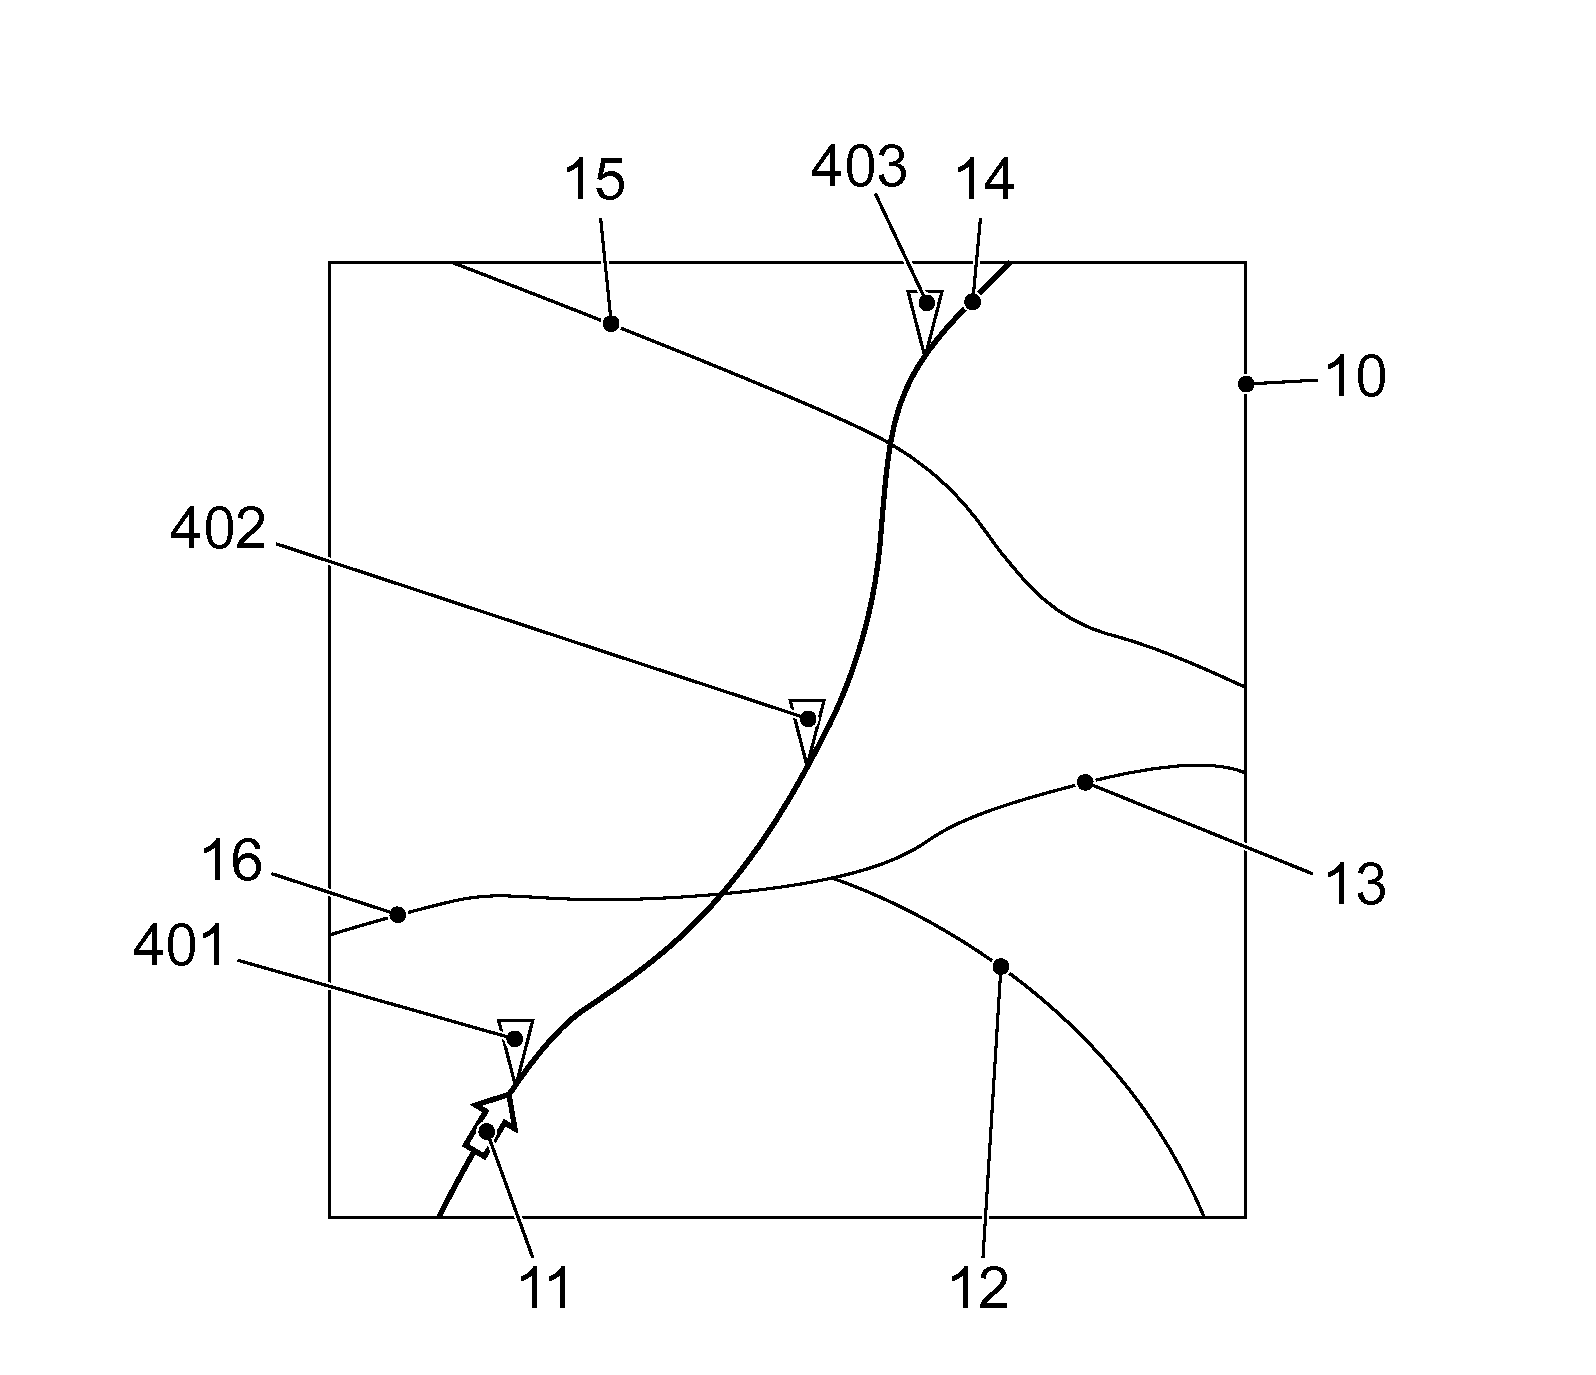 Display method for a vehicle